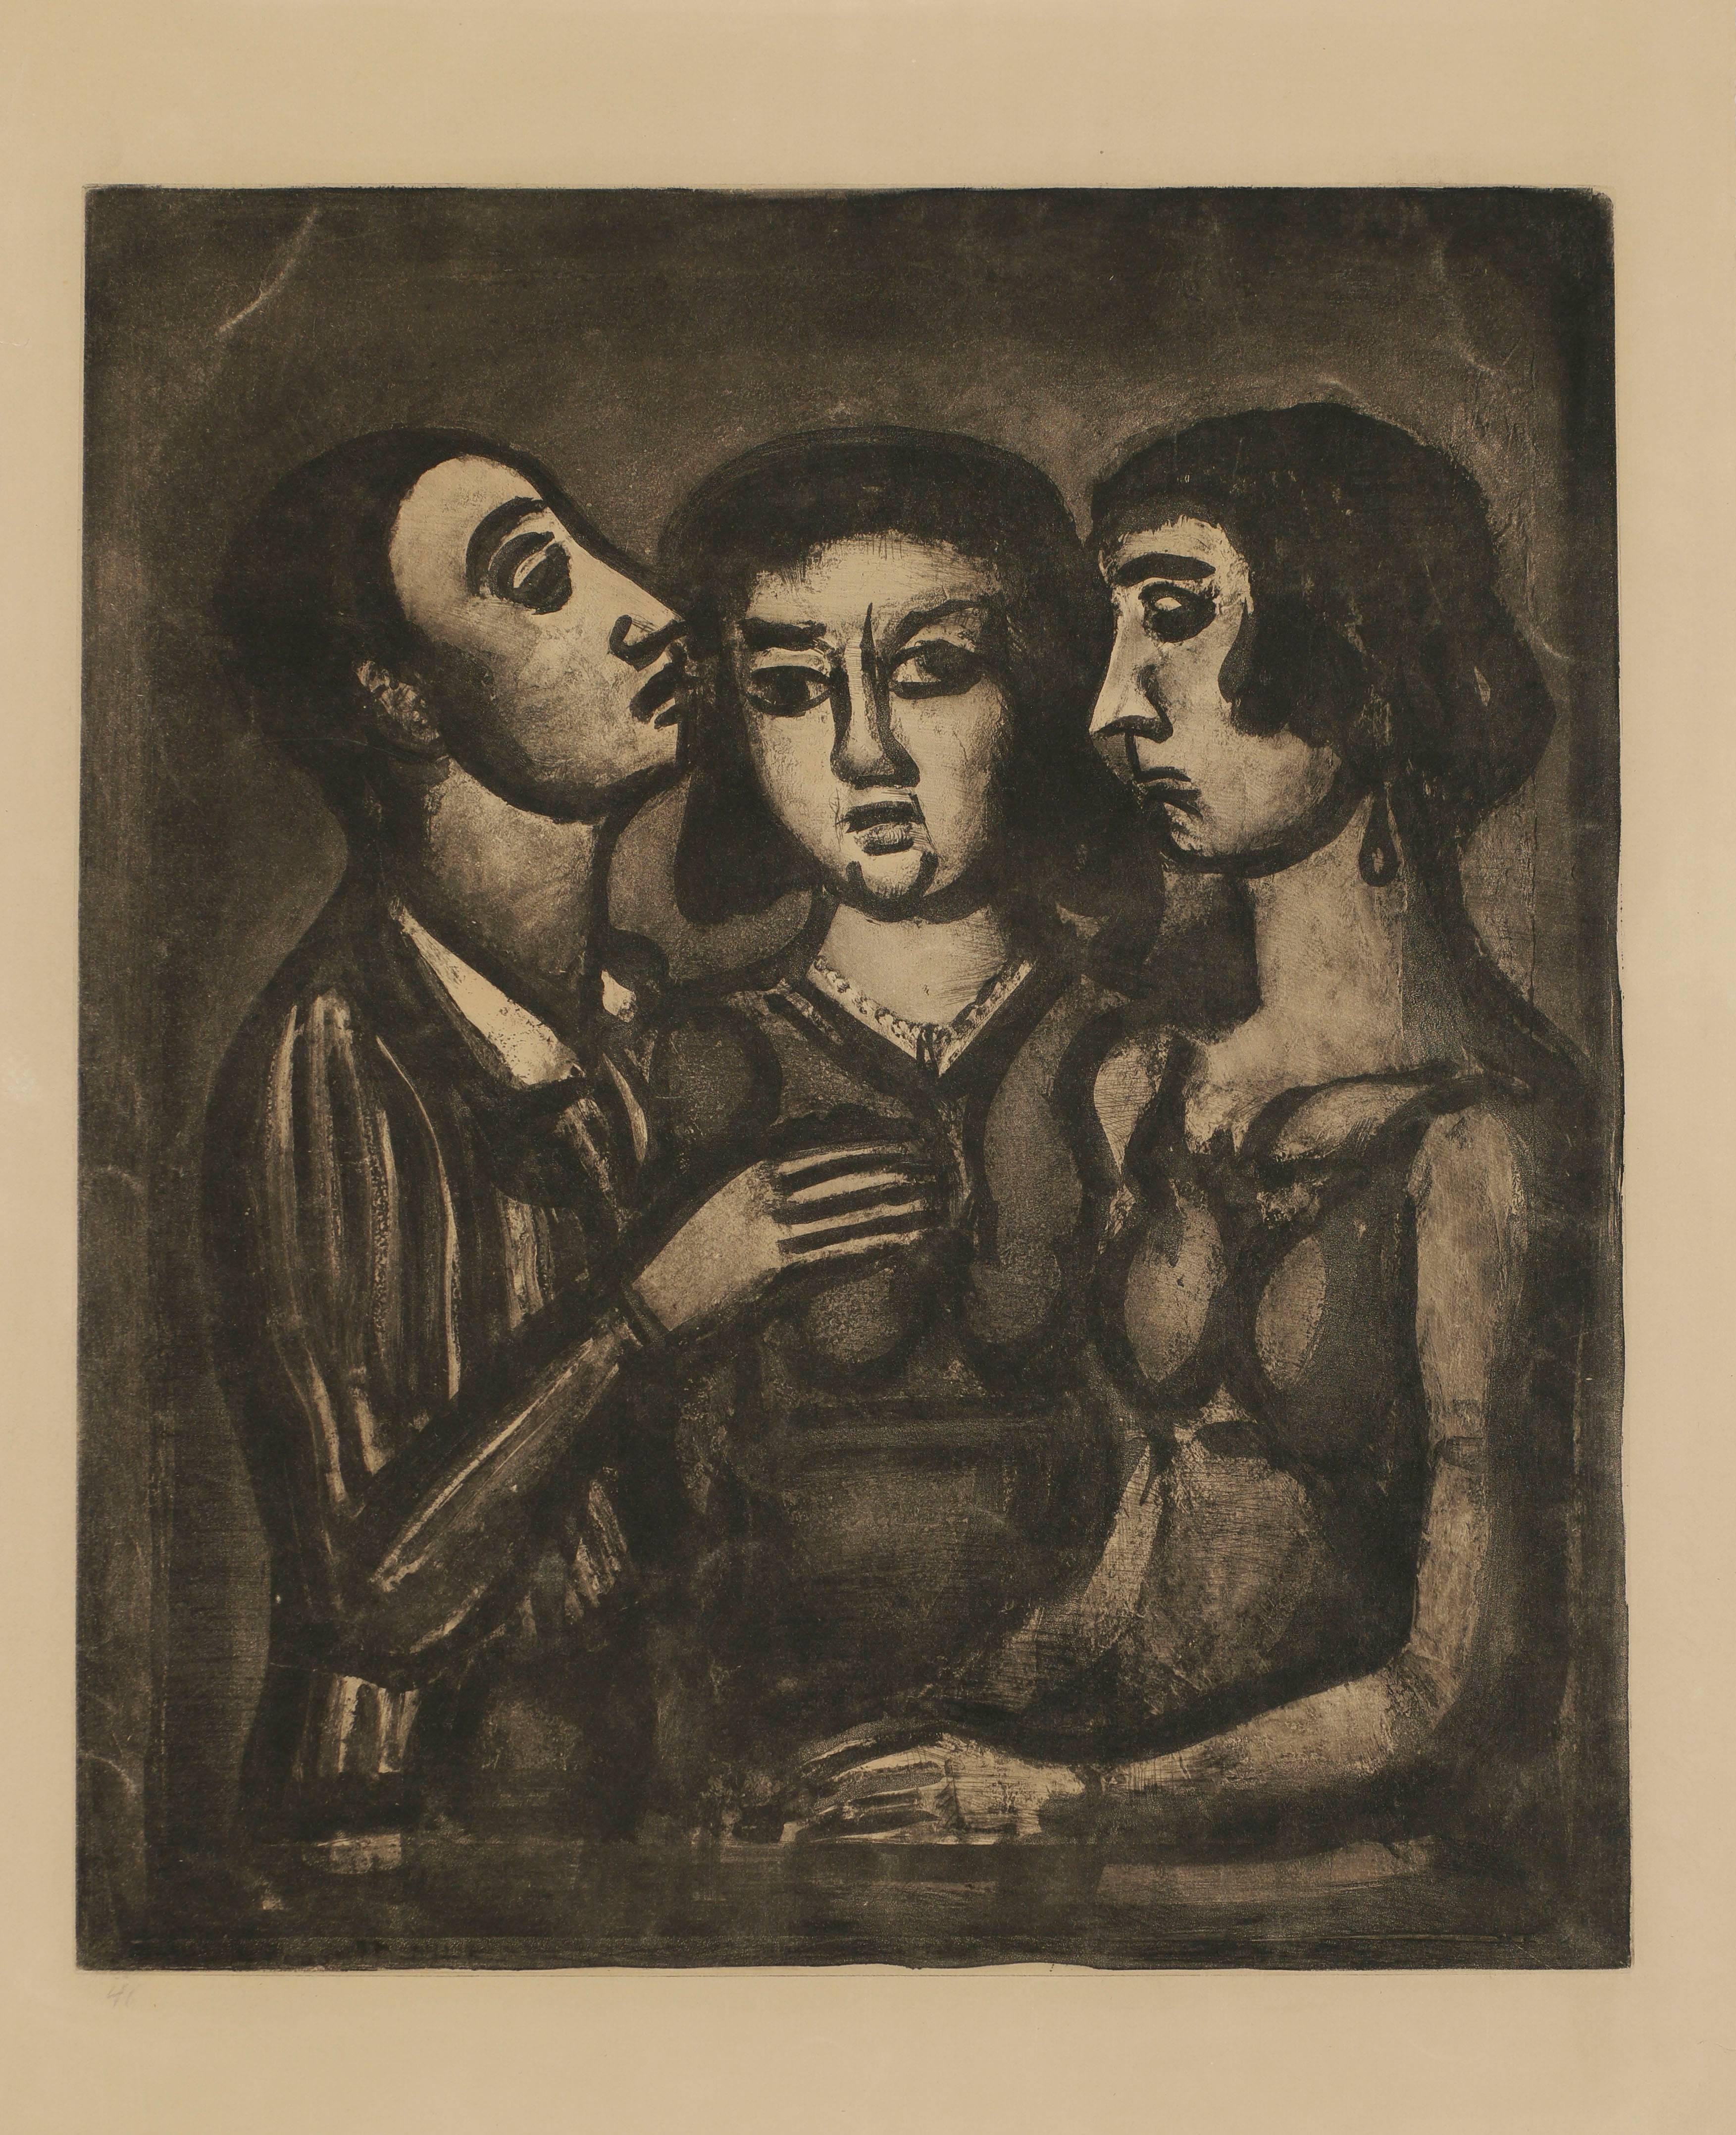 Georges Rouault Figurative Print - "Portents", Plate 41 from Rouault's Miserere